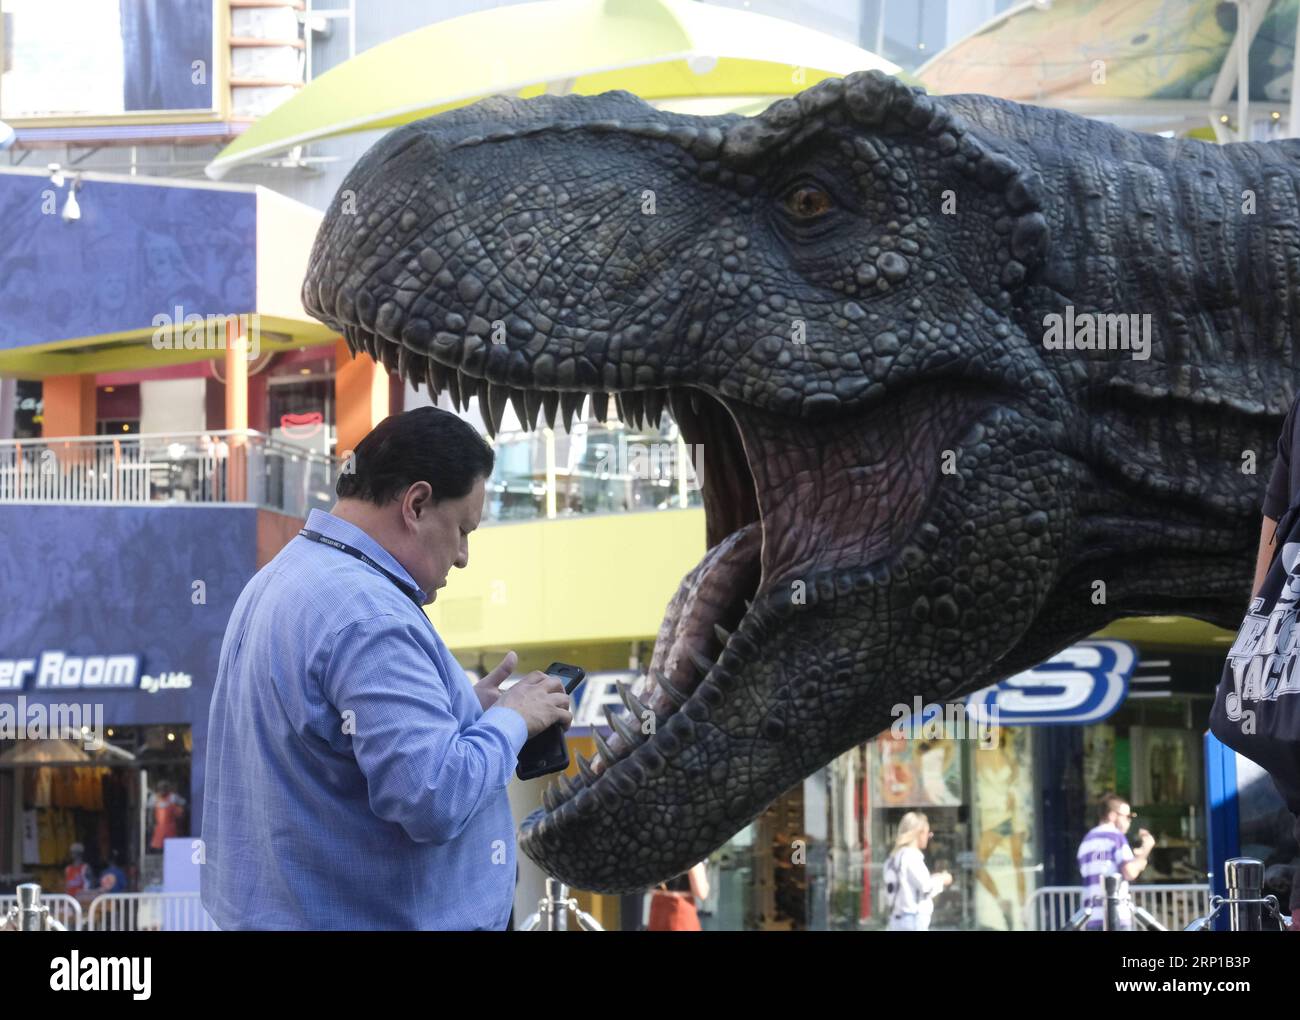 (180622) -- LOS ANGELES, June 22, 2018 -- A man passes by a giant Tyrannosaurus rex statue at Universal CityWalk in Los Angeles, the United States, on June 21, 2018. For the promotion of the screening of the new film Jurassic World: Fallen Kingdom on Universal Cinema Theatres, a colossal 3-ton Tyrannosaurus rex, a life-sized Gyrosphere original movie prop, as well as original costume, are displayed for public at Universal CityWalk. ) (zxj) U.S.-LOS ANGELES-DINOSAUR-STATUE ZhaoxHanrong PUBLICATIONxNOTxINxCHN Stock Photo